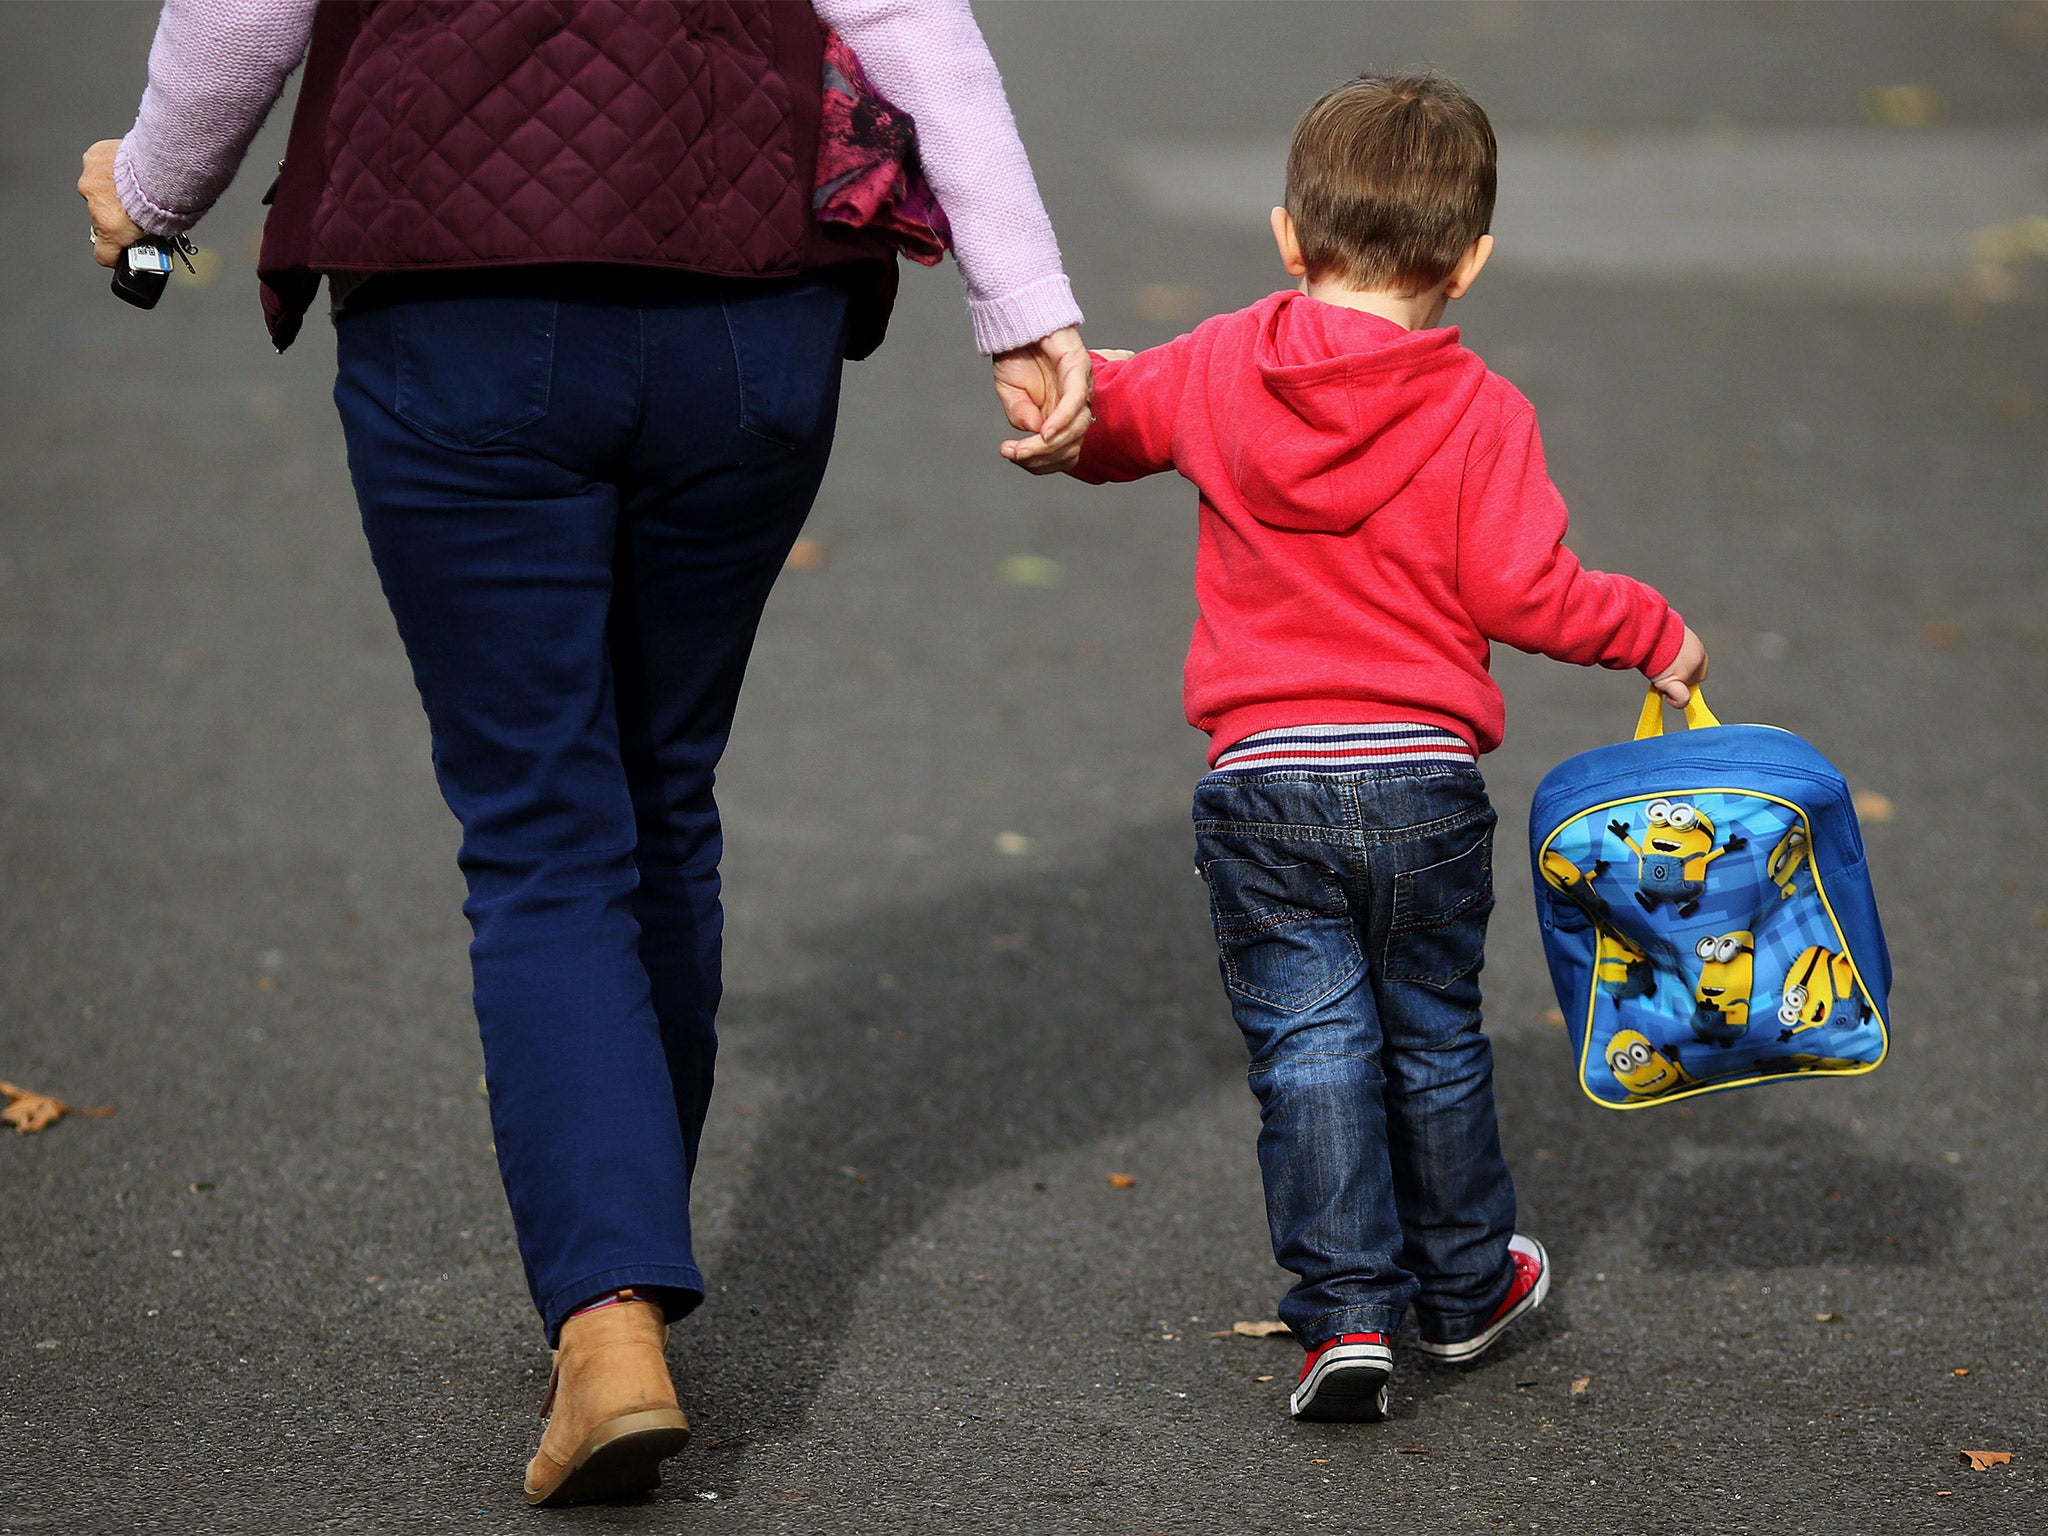 Families are typically spending around a quarter of their household income on childcare, according to the report